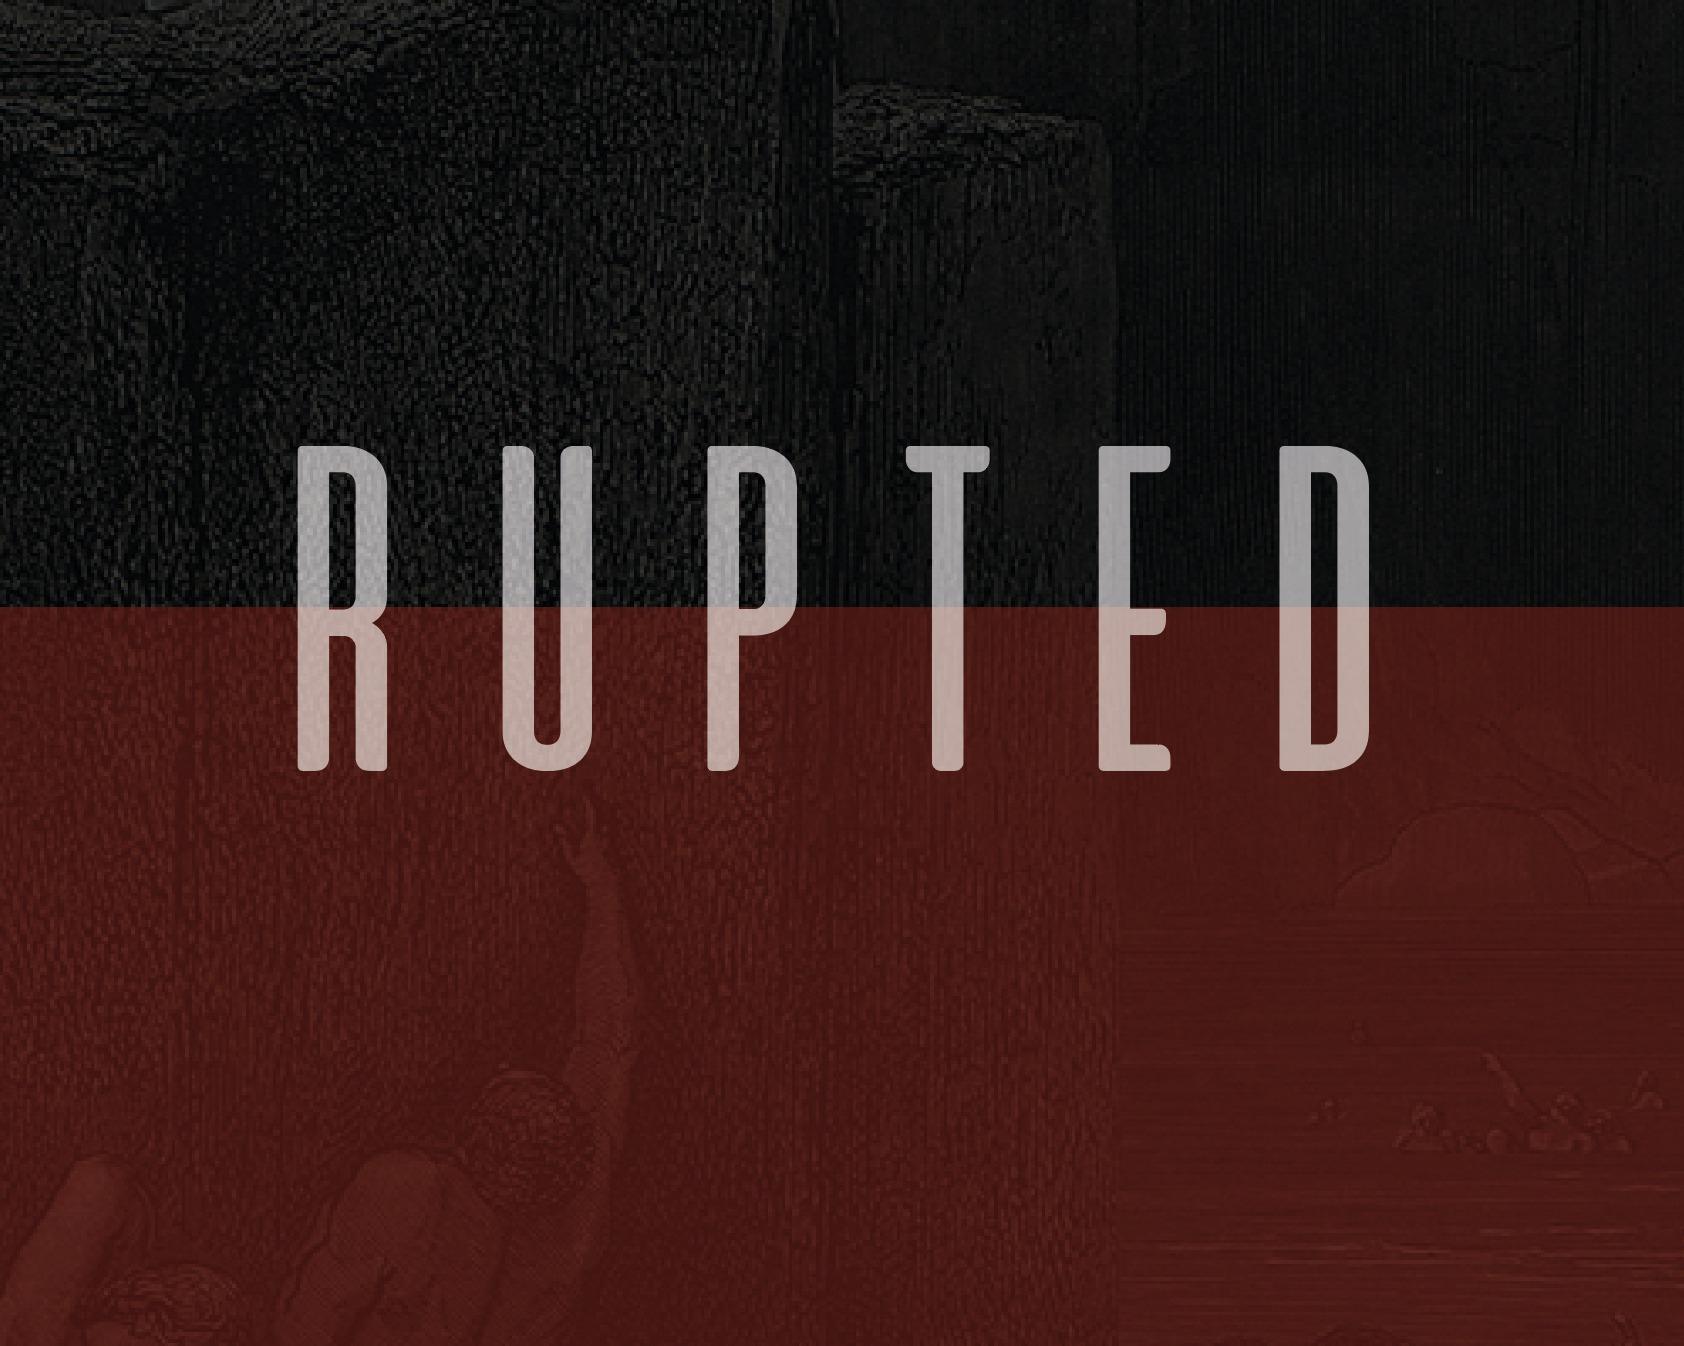 RUPTED